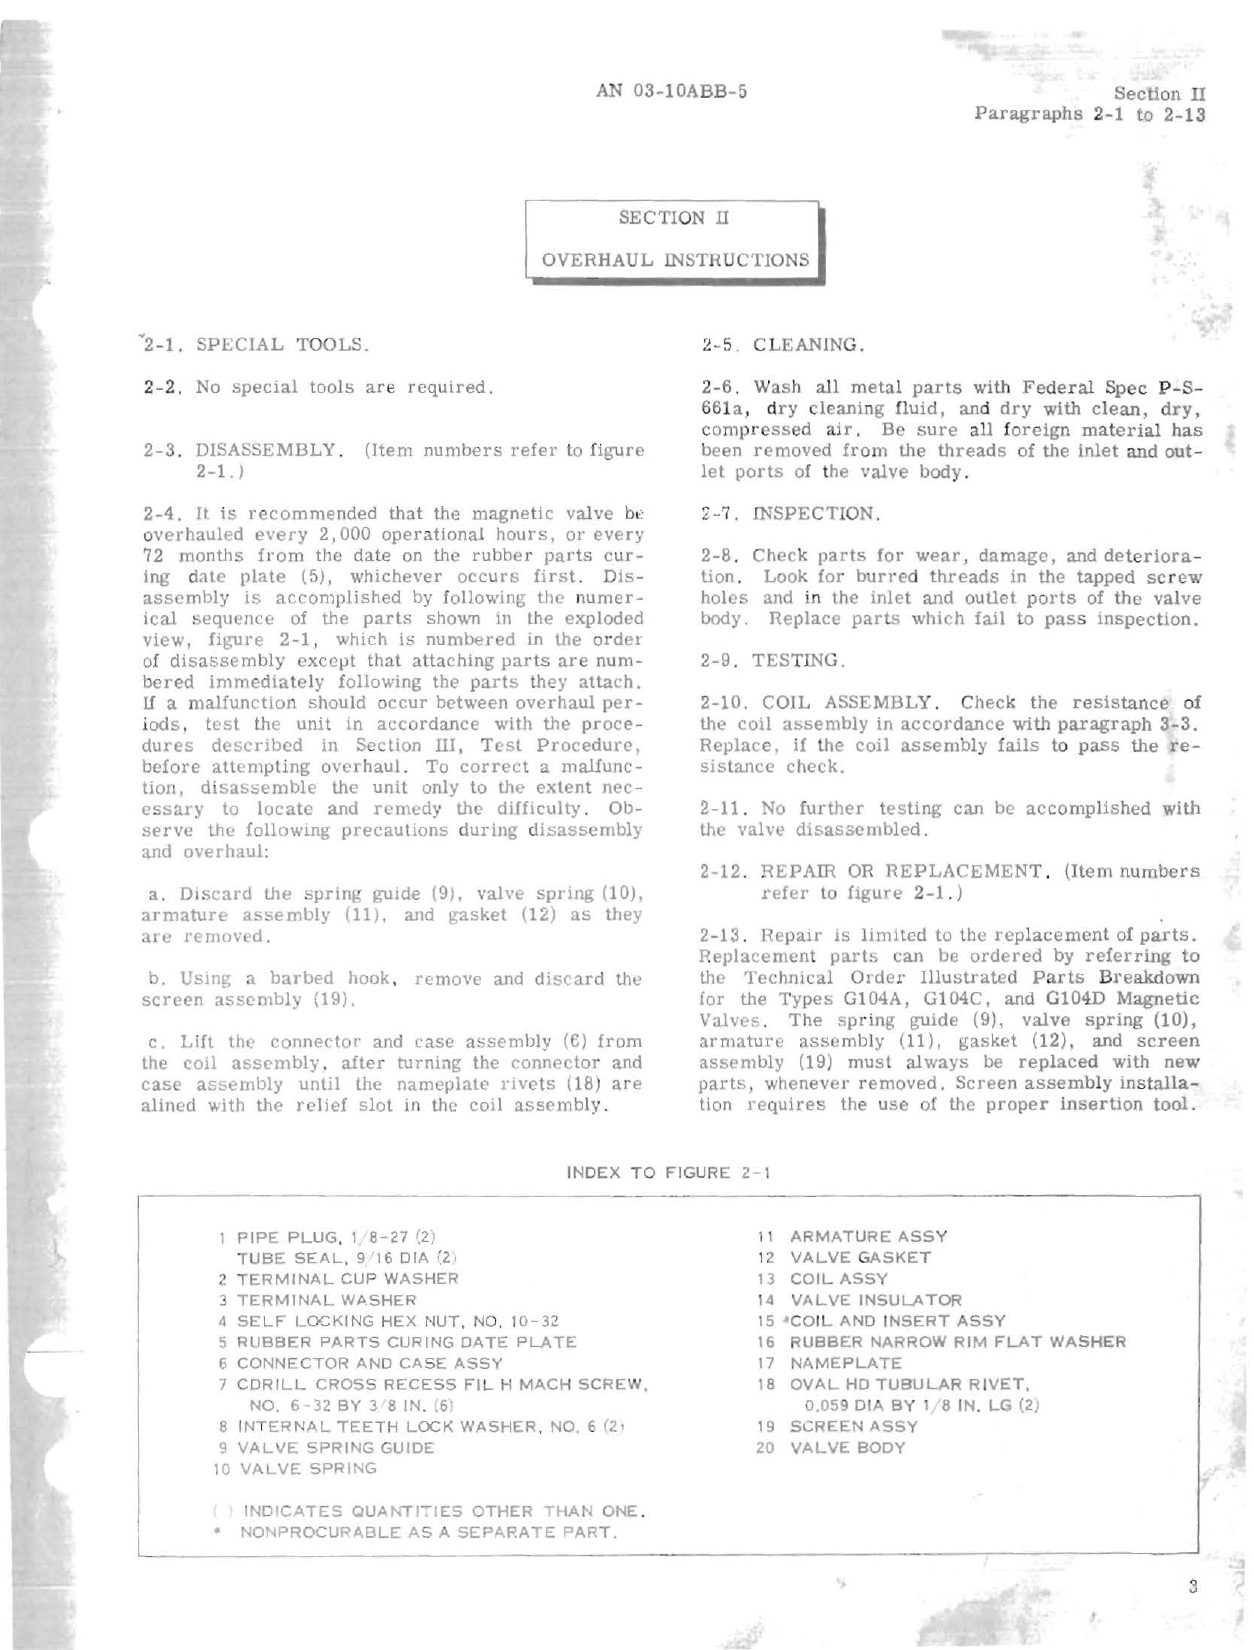 Sample page 5 from AirCorps Library document: Overhaul Instructions for Magnetic Valve - Types G104A, G104C, and G104D 